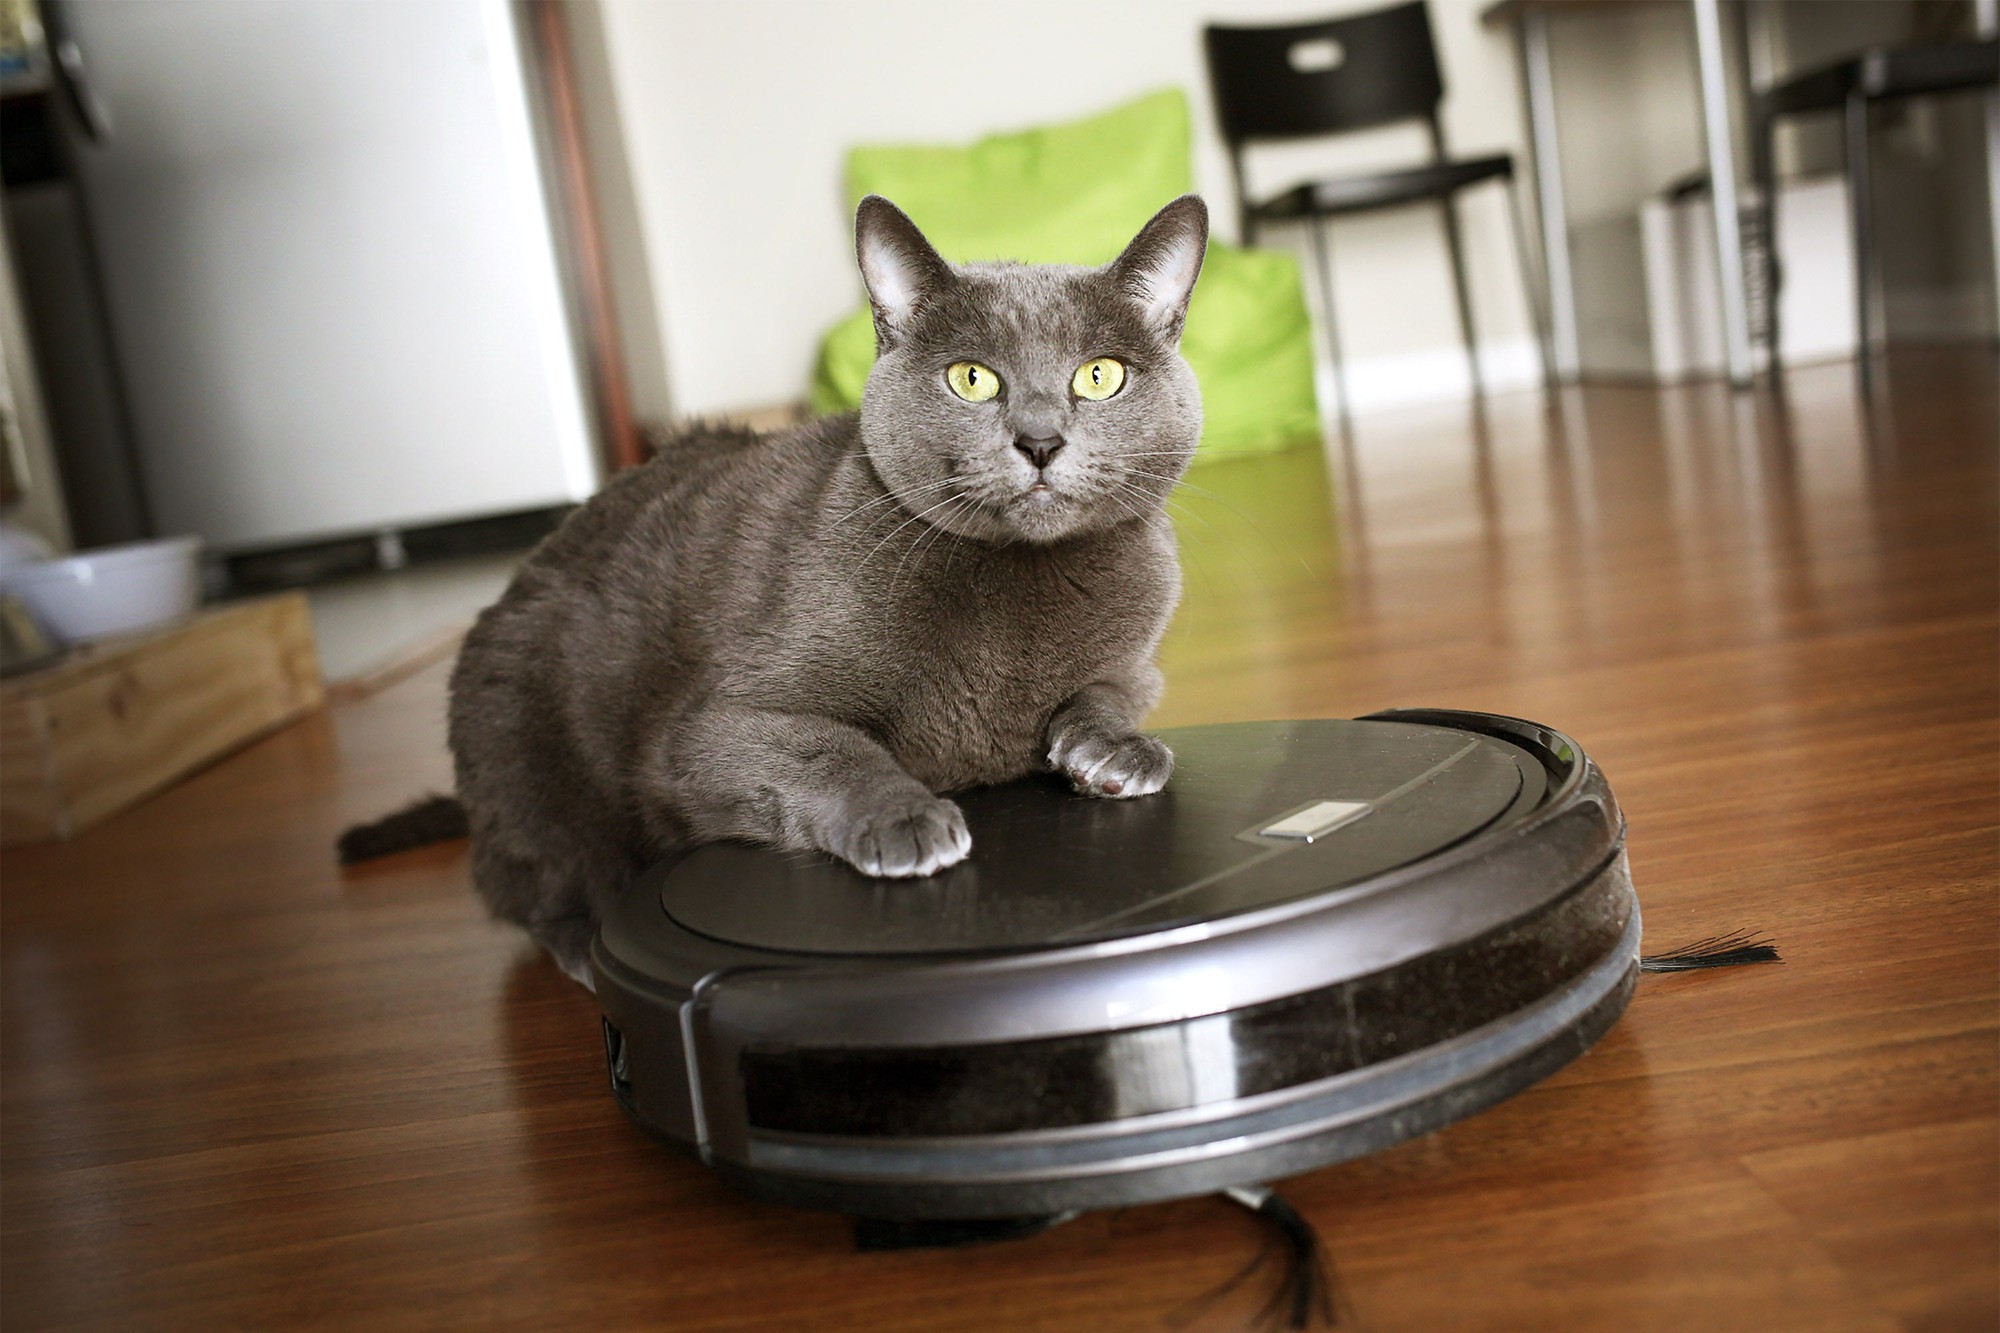 Ranking of the best robot vacuum cleaners for animal hair for 2022